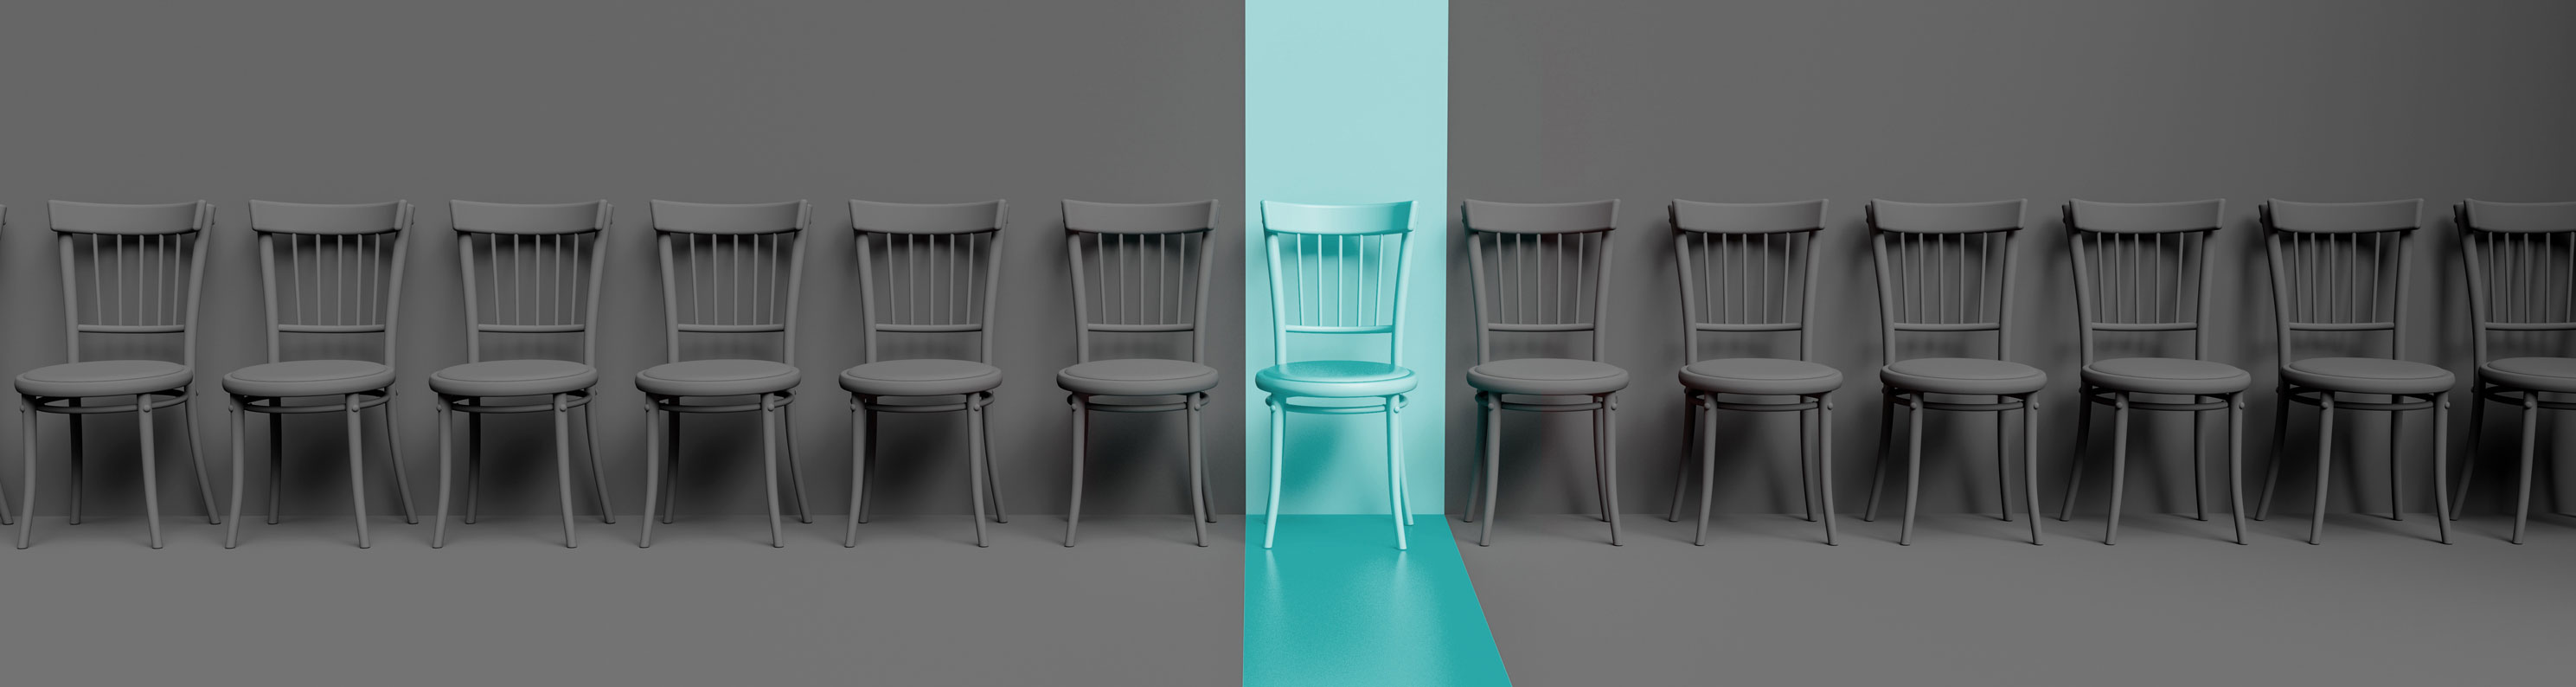 Chairs in a row with one highlighted